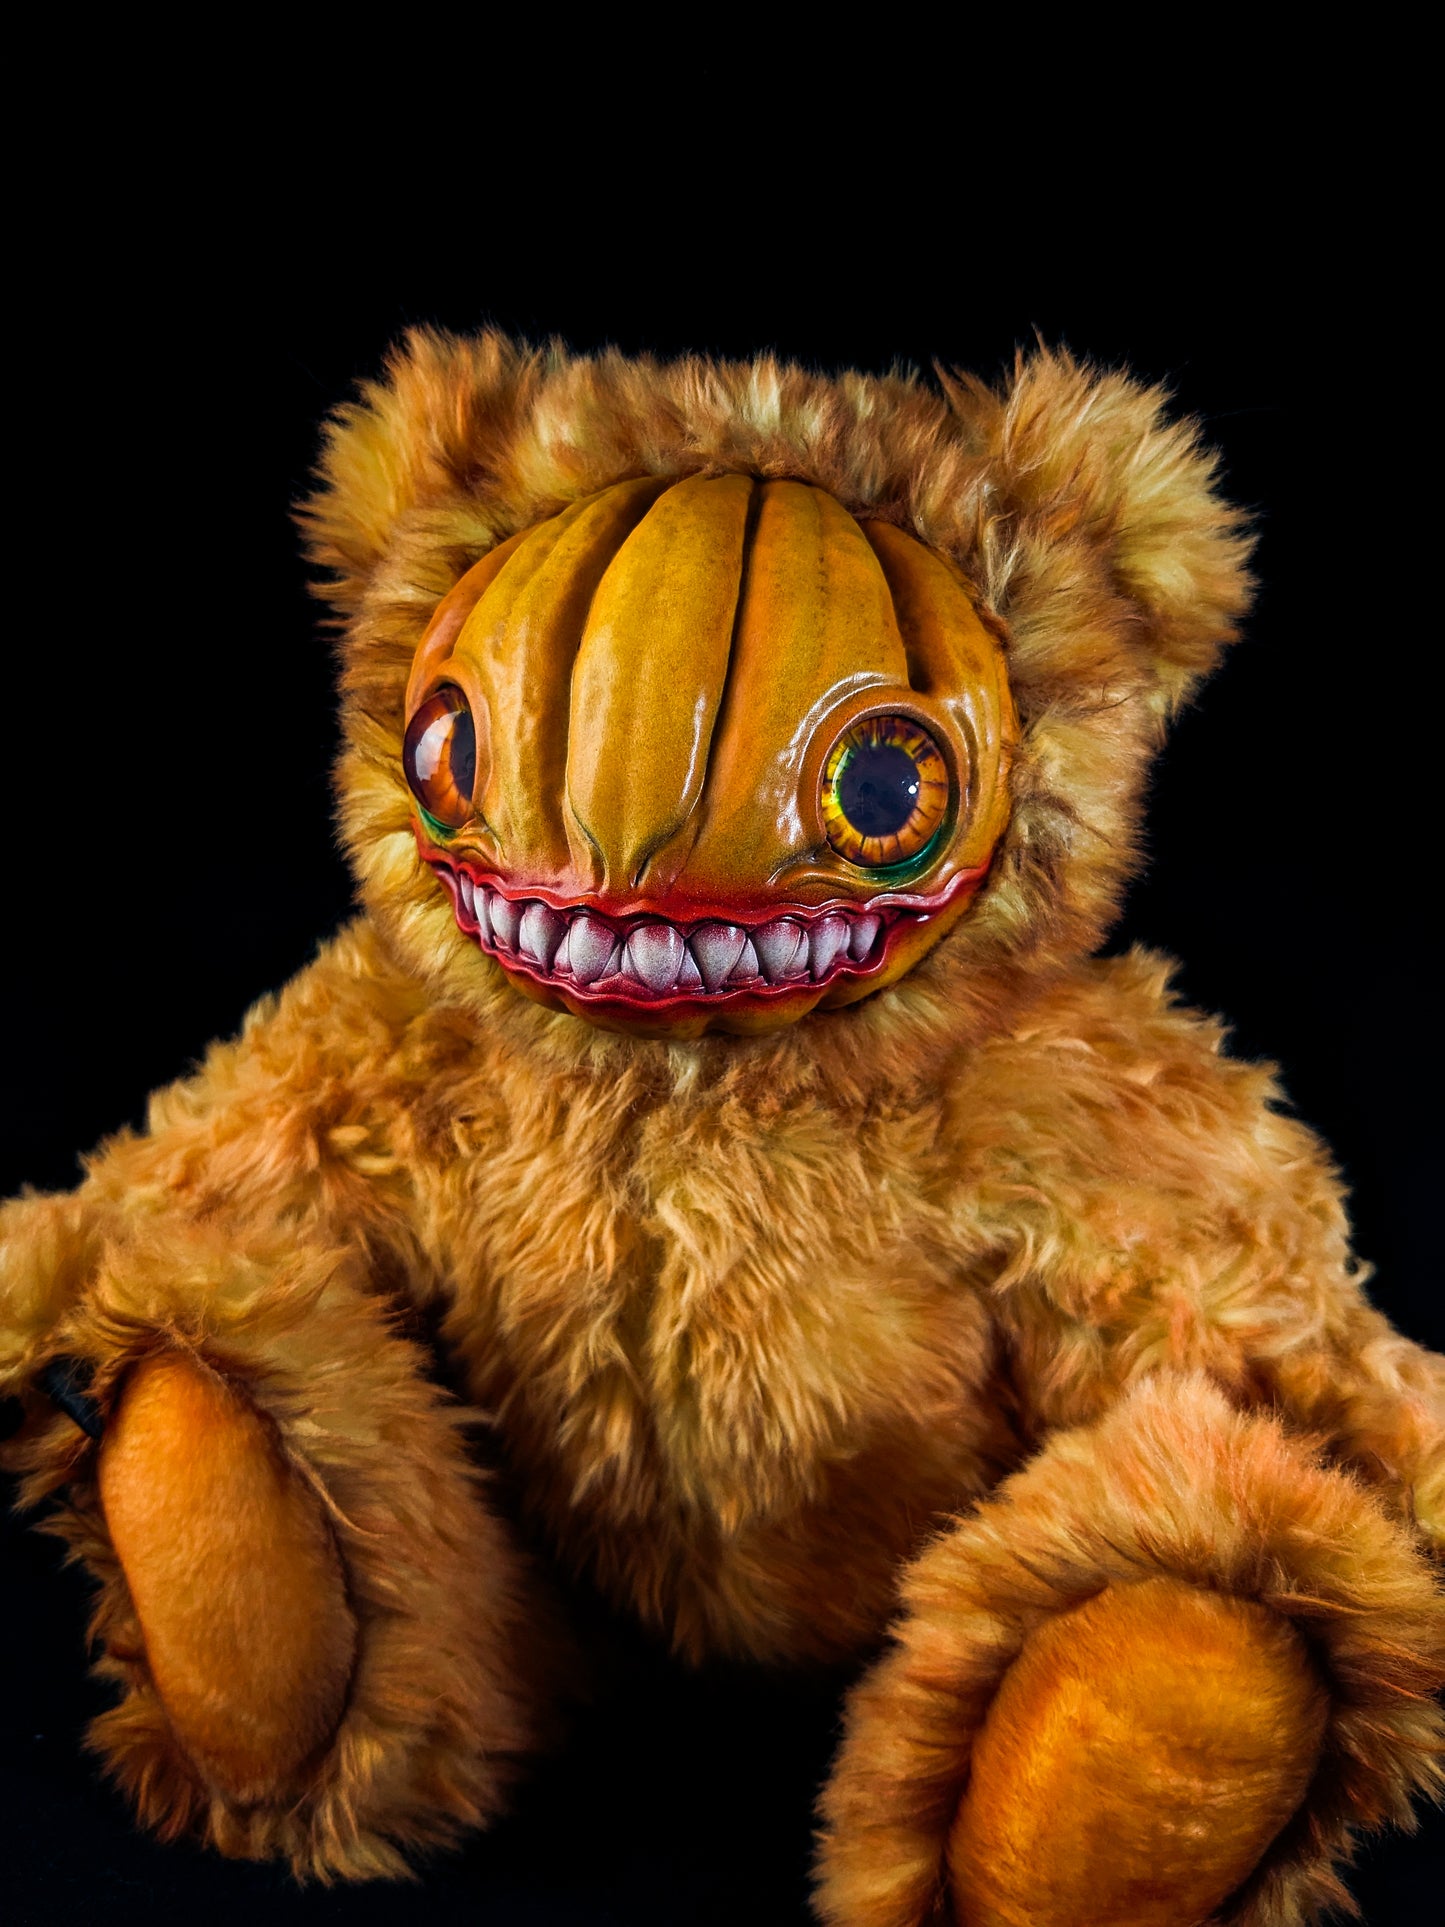 Grizzly Gourd: HAUNTVESTER - CRYPTCRITZ Handcrafted Creepy Cute Halloween Pumpkin Art Doll Plush Toy for Spooky Souls